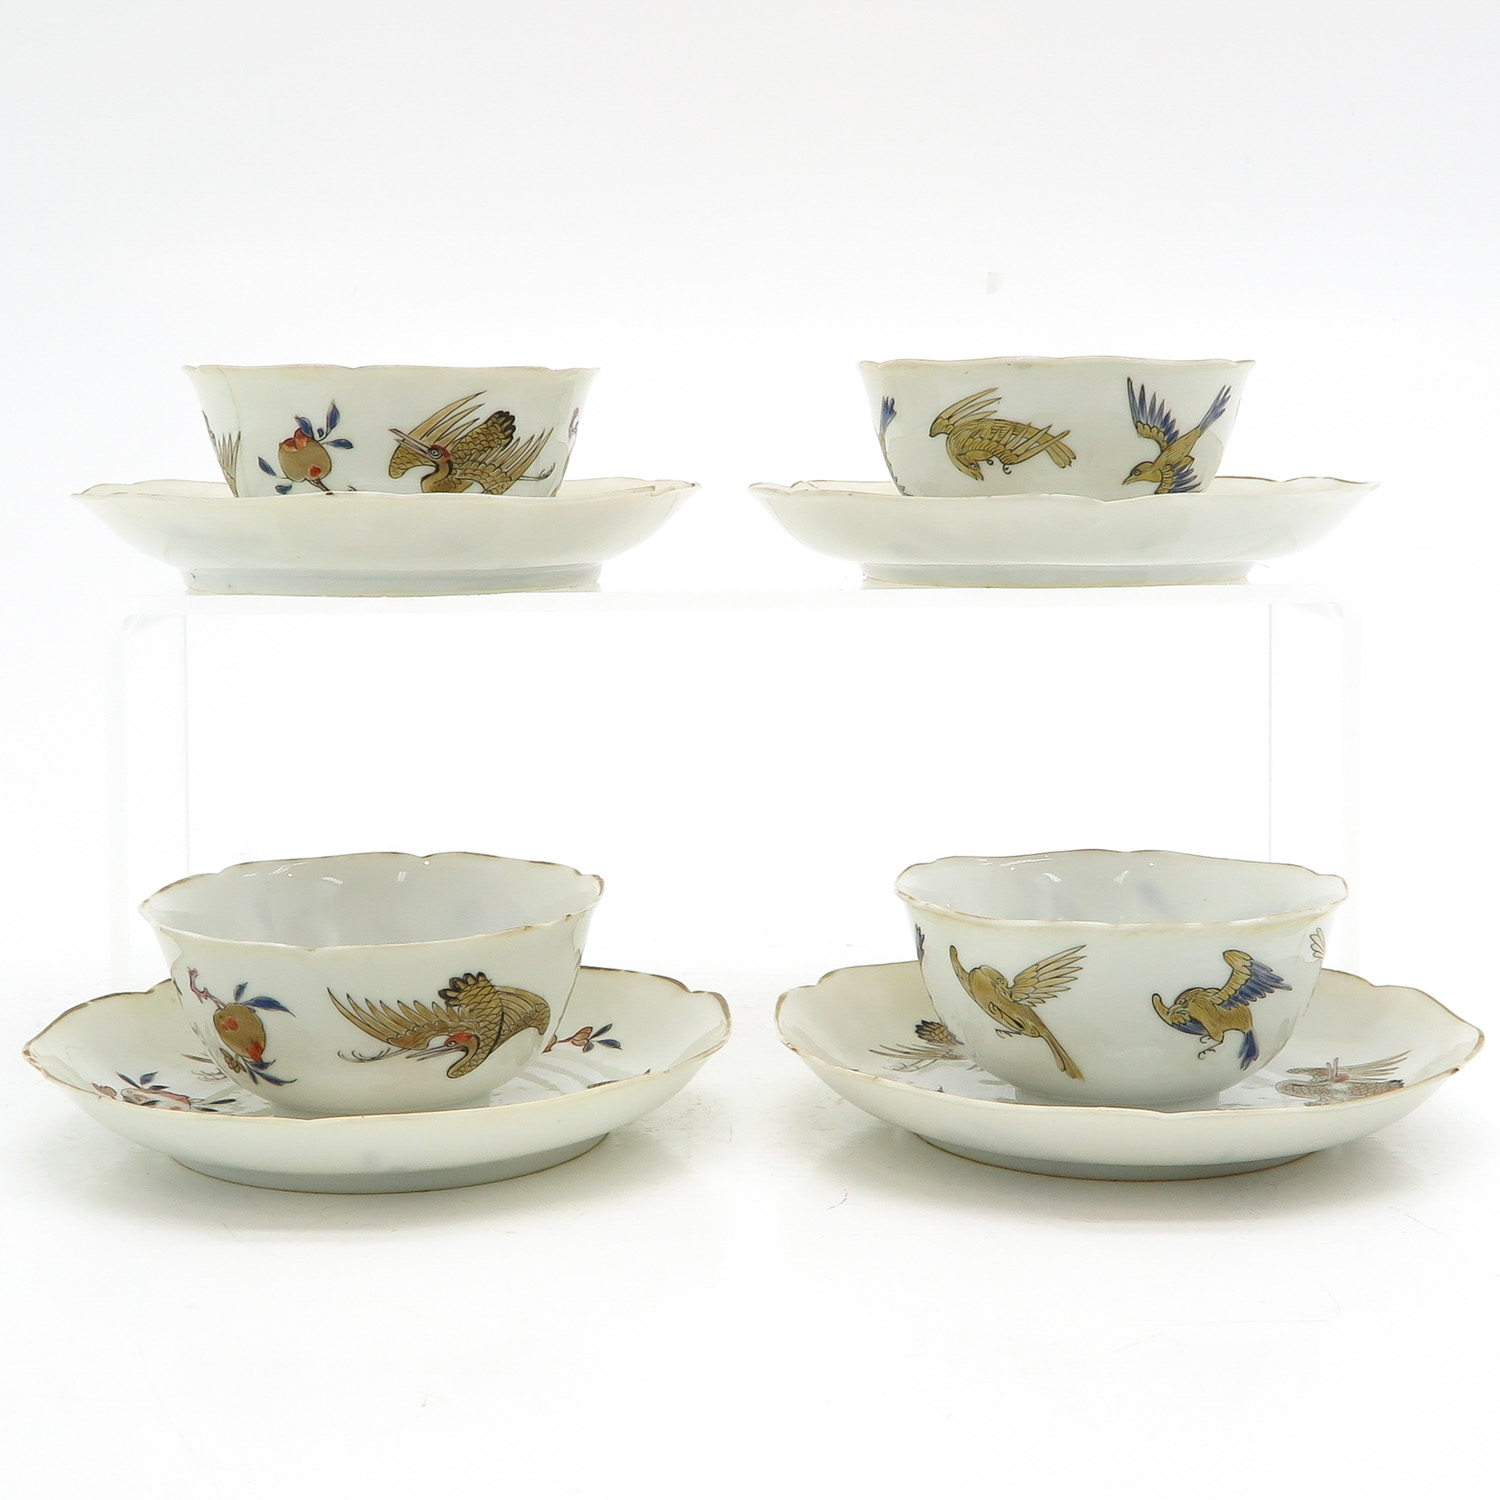 A Series of 4 Cups and Saucers - Image 2 of 10